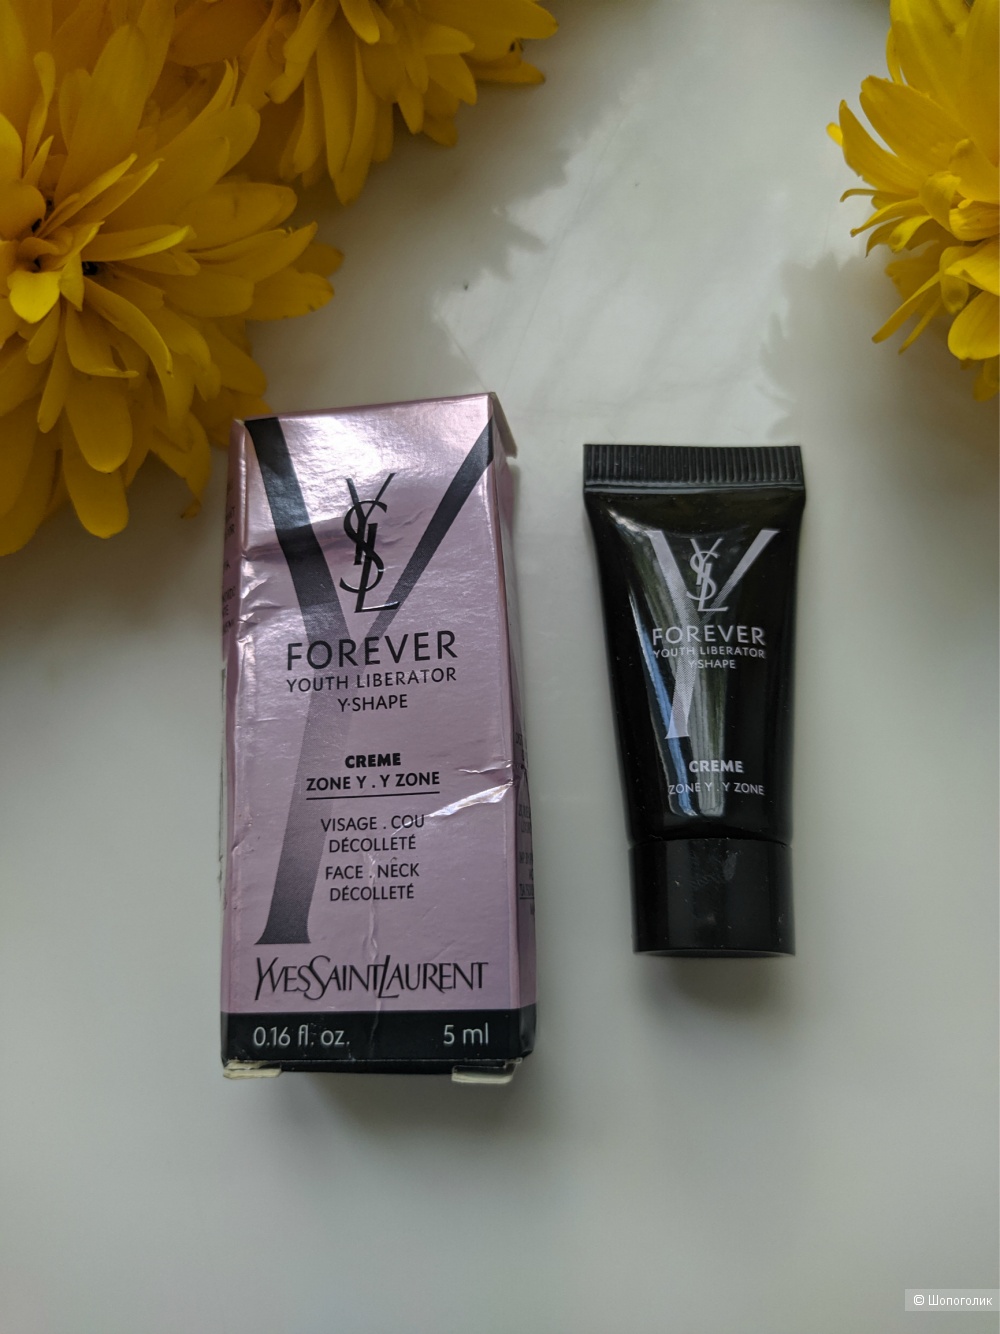 YVES SAINT LAURENT FOREVER YOUTH LIBERATOR Y-Shape,5 мл